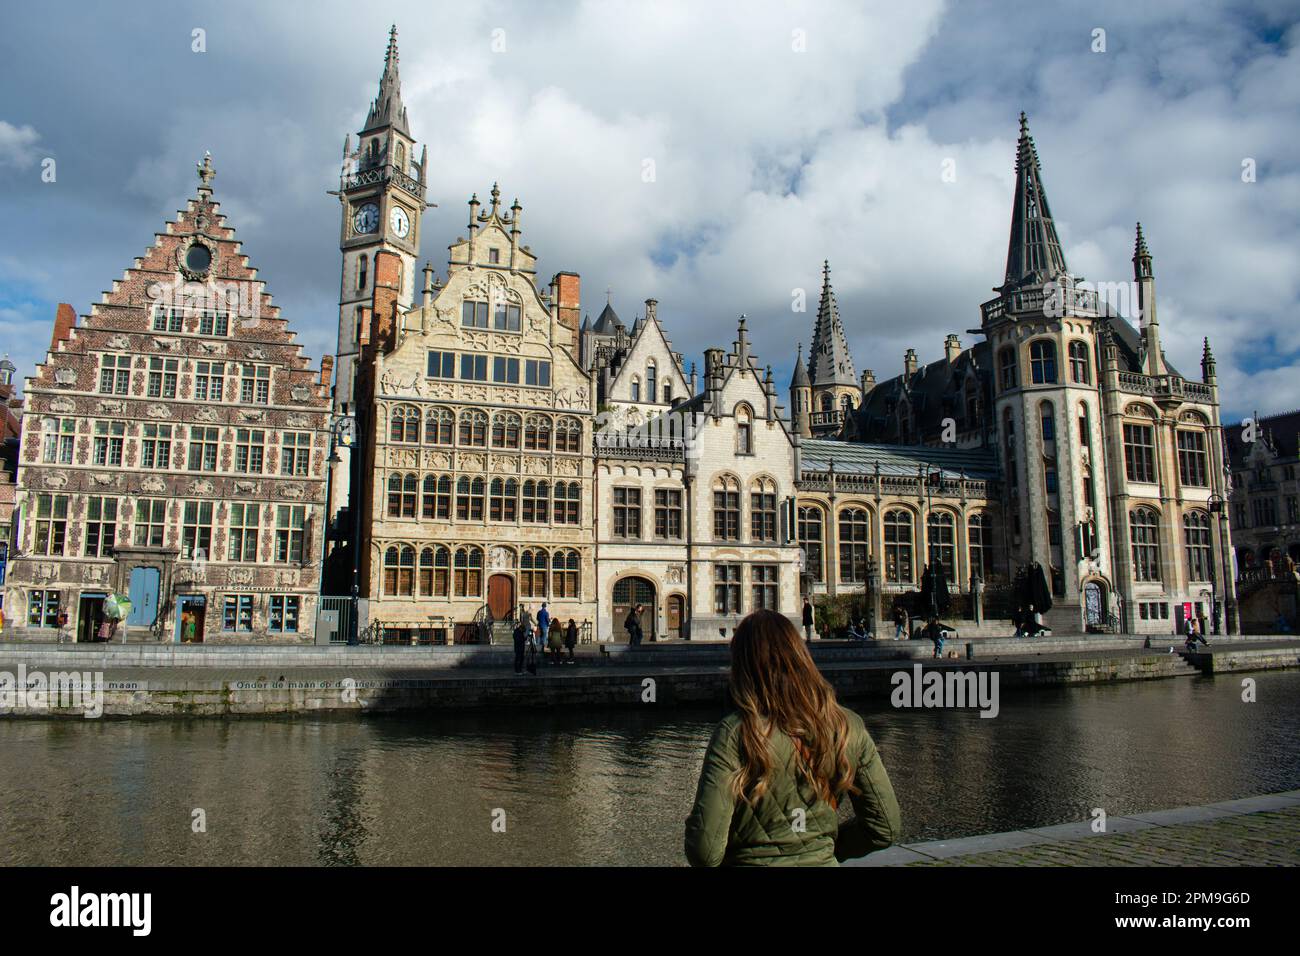 Iconic gothic architecture in Ghent, Belgium Downtown- Saint Nicholas' Church and Graslei buildings Stock Photo